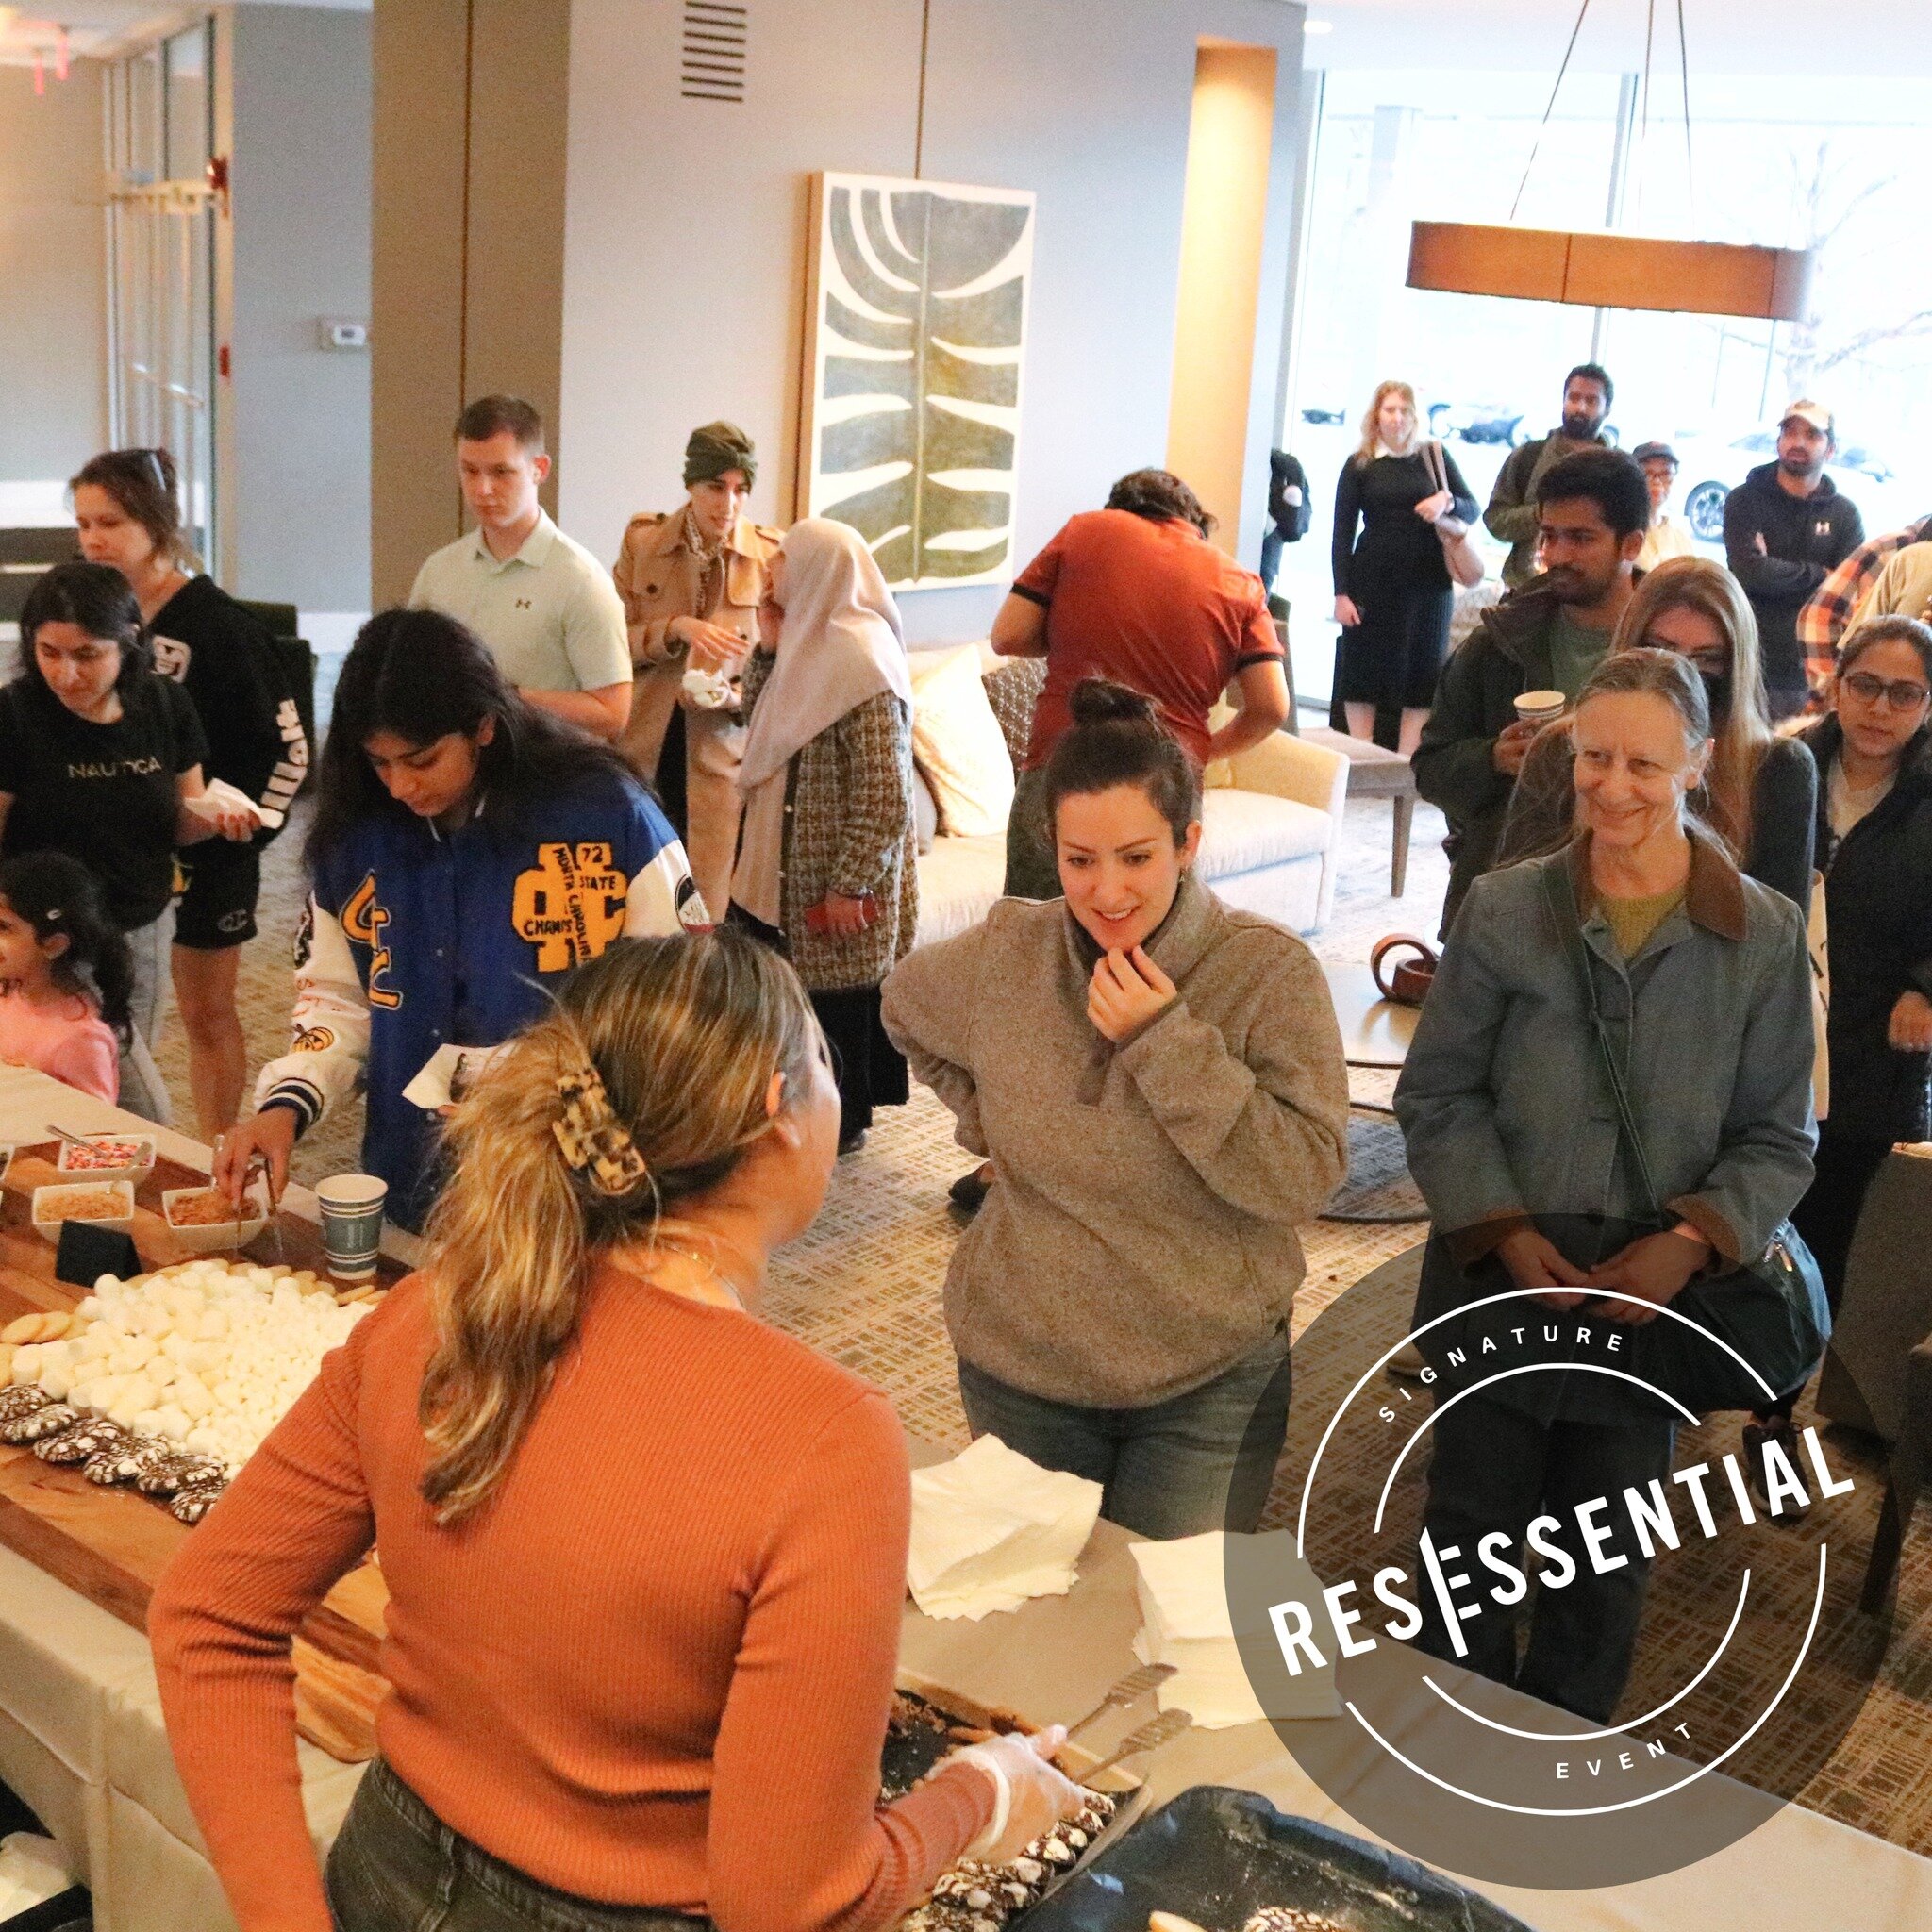 Our signature Cookies N&rsquo; Cocoa event with @mahzedahrbakery @riverhouseapt 🍪☕

#resessential #residentevents #liveauthentic #experientialmarketing #apartmentliving #amenityspaces #amenities #apartmentgoals #apartmentlife #luxuryapartments #luxu